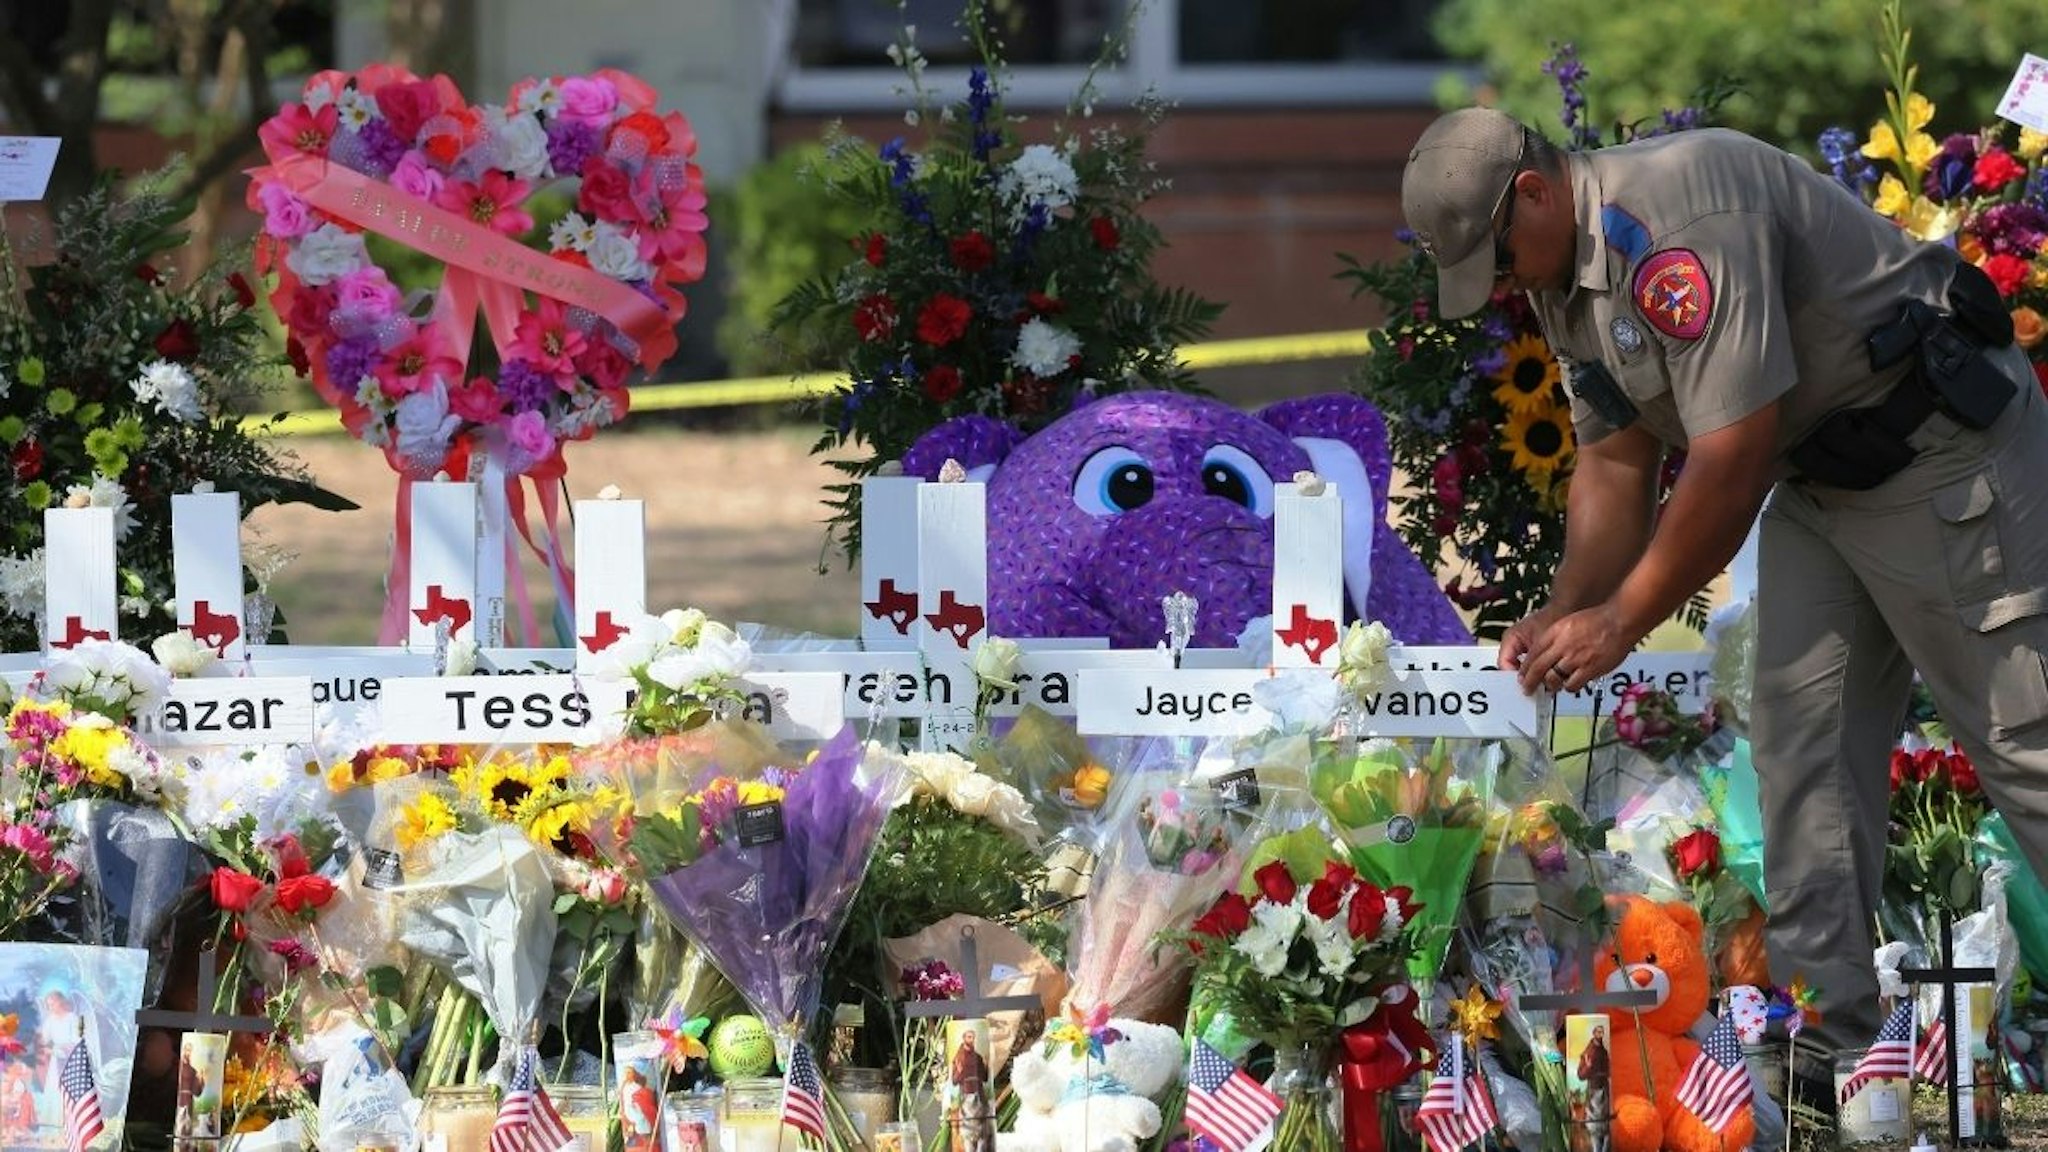 A Texas Highway Patrol Trooper places an item at a memorial for victims of Tuesday's mass shooting at Robb Elementary School on May 27, 2022 in Uvalde, Texas.